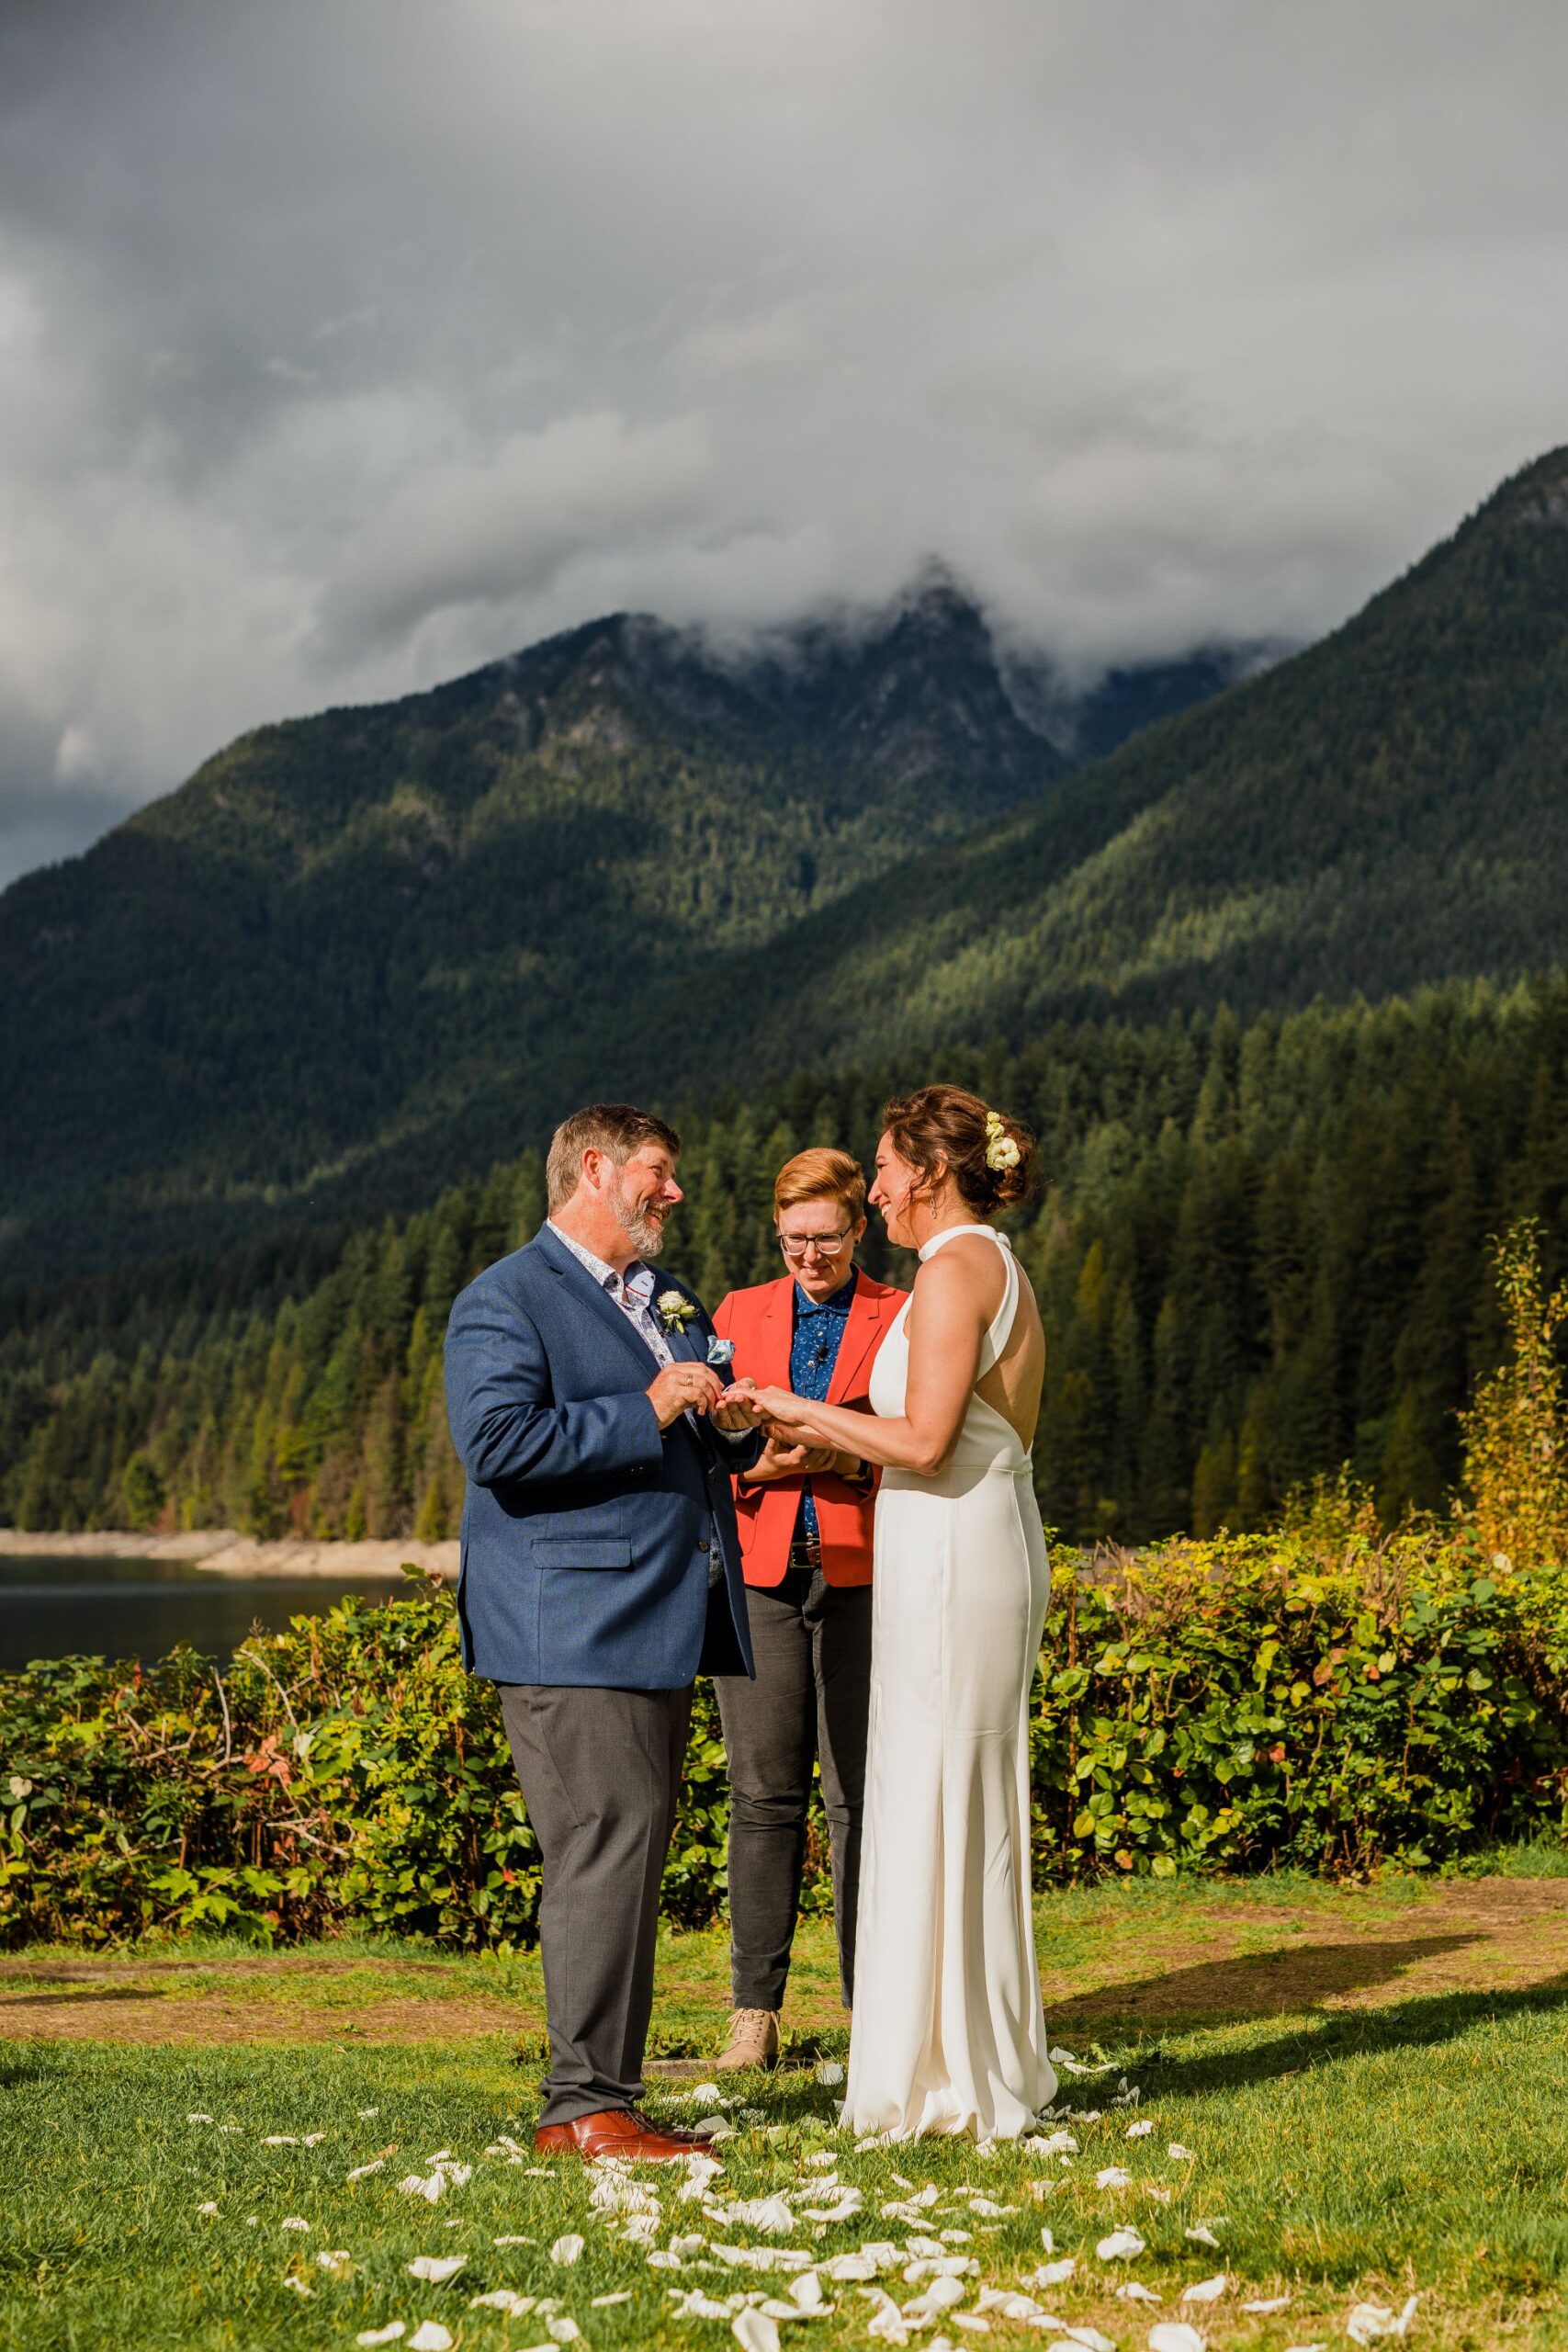 do you need an officiant for your vow renewal?